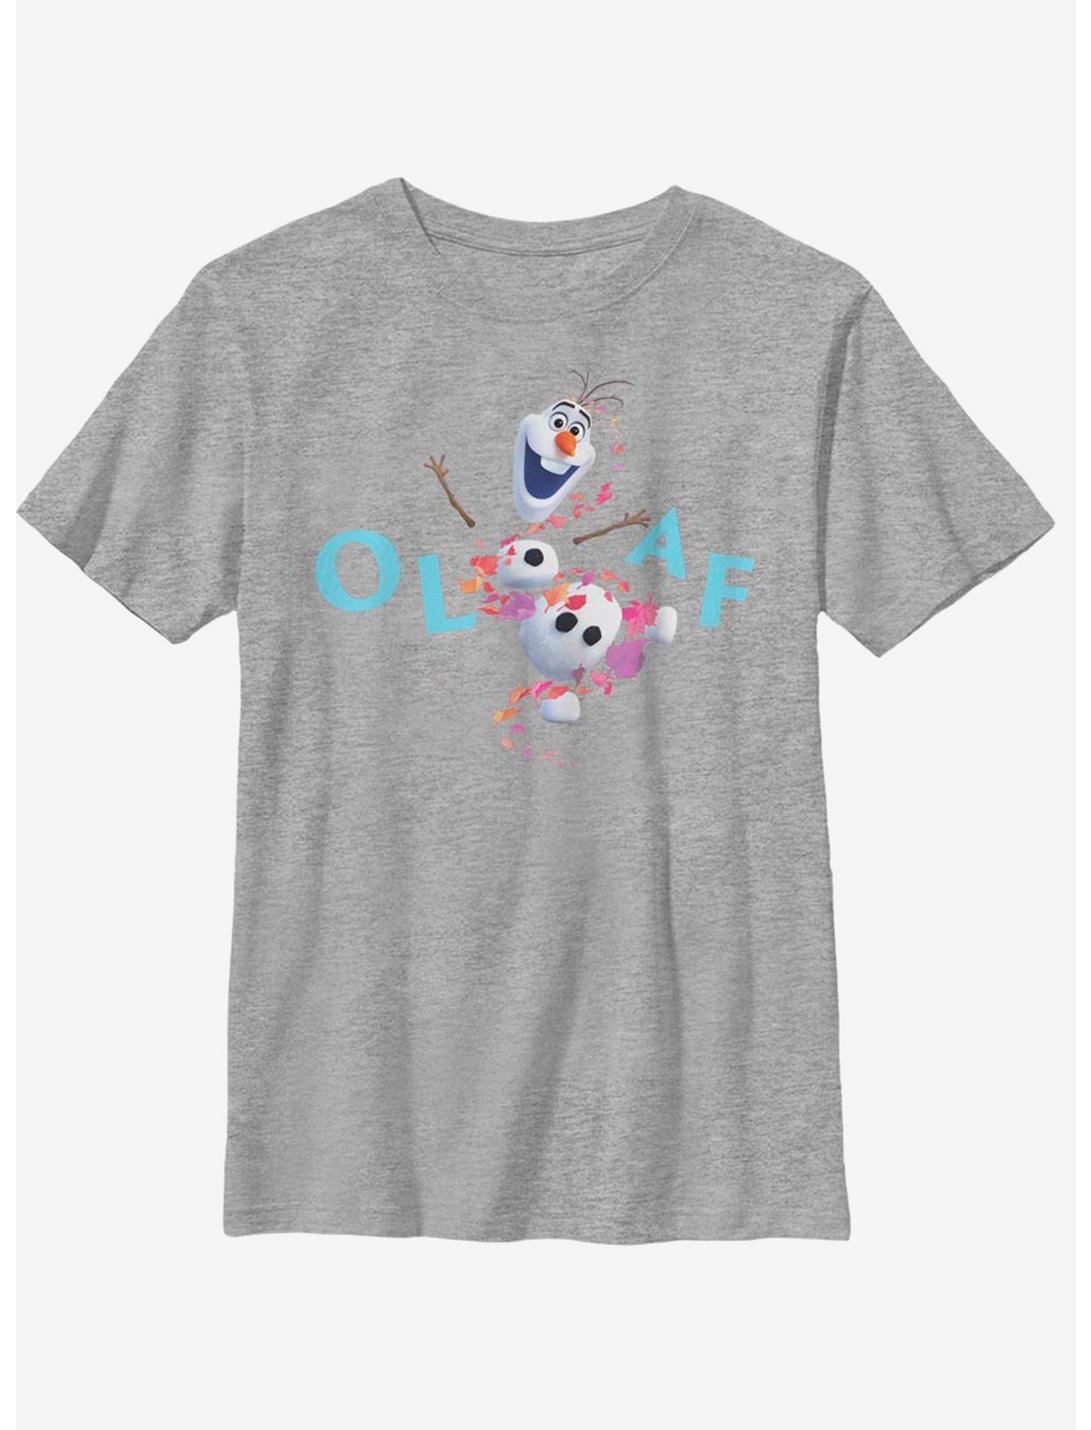 Disney Frozen 2 Olaf Loves Fall Youth T-Shirt, ATH HTR, hi-res